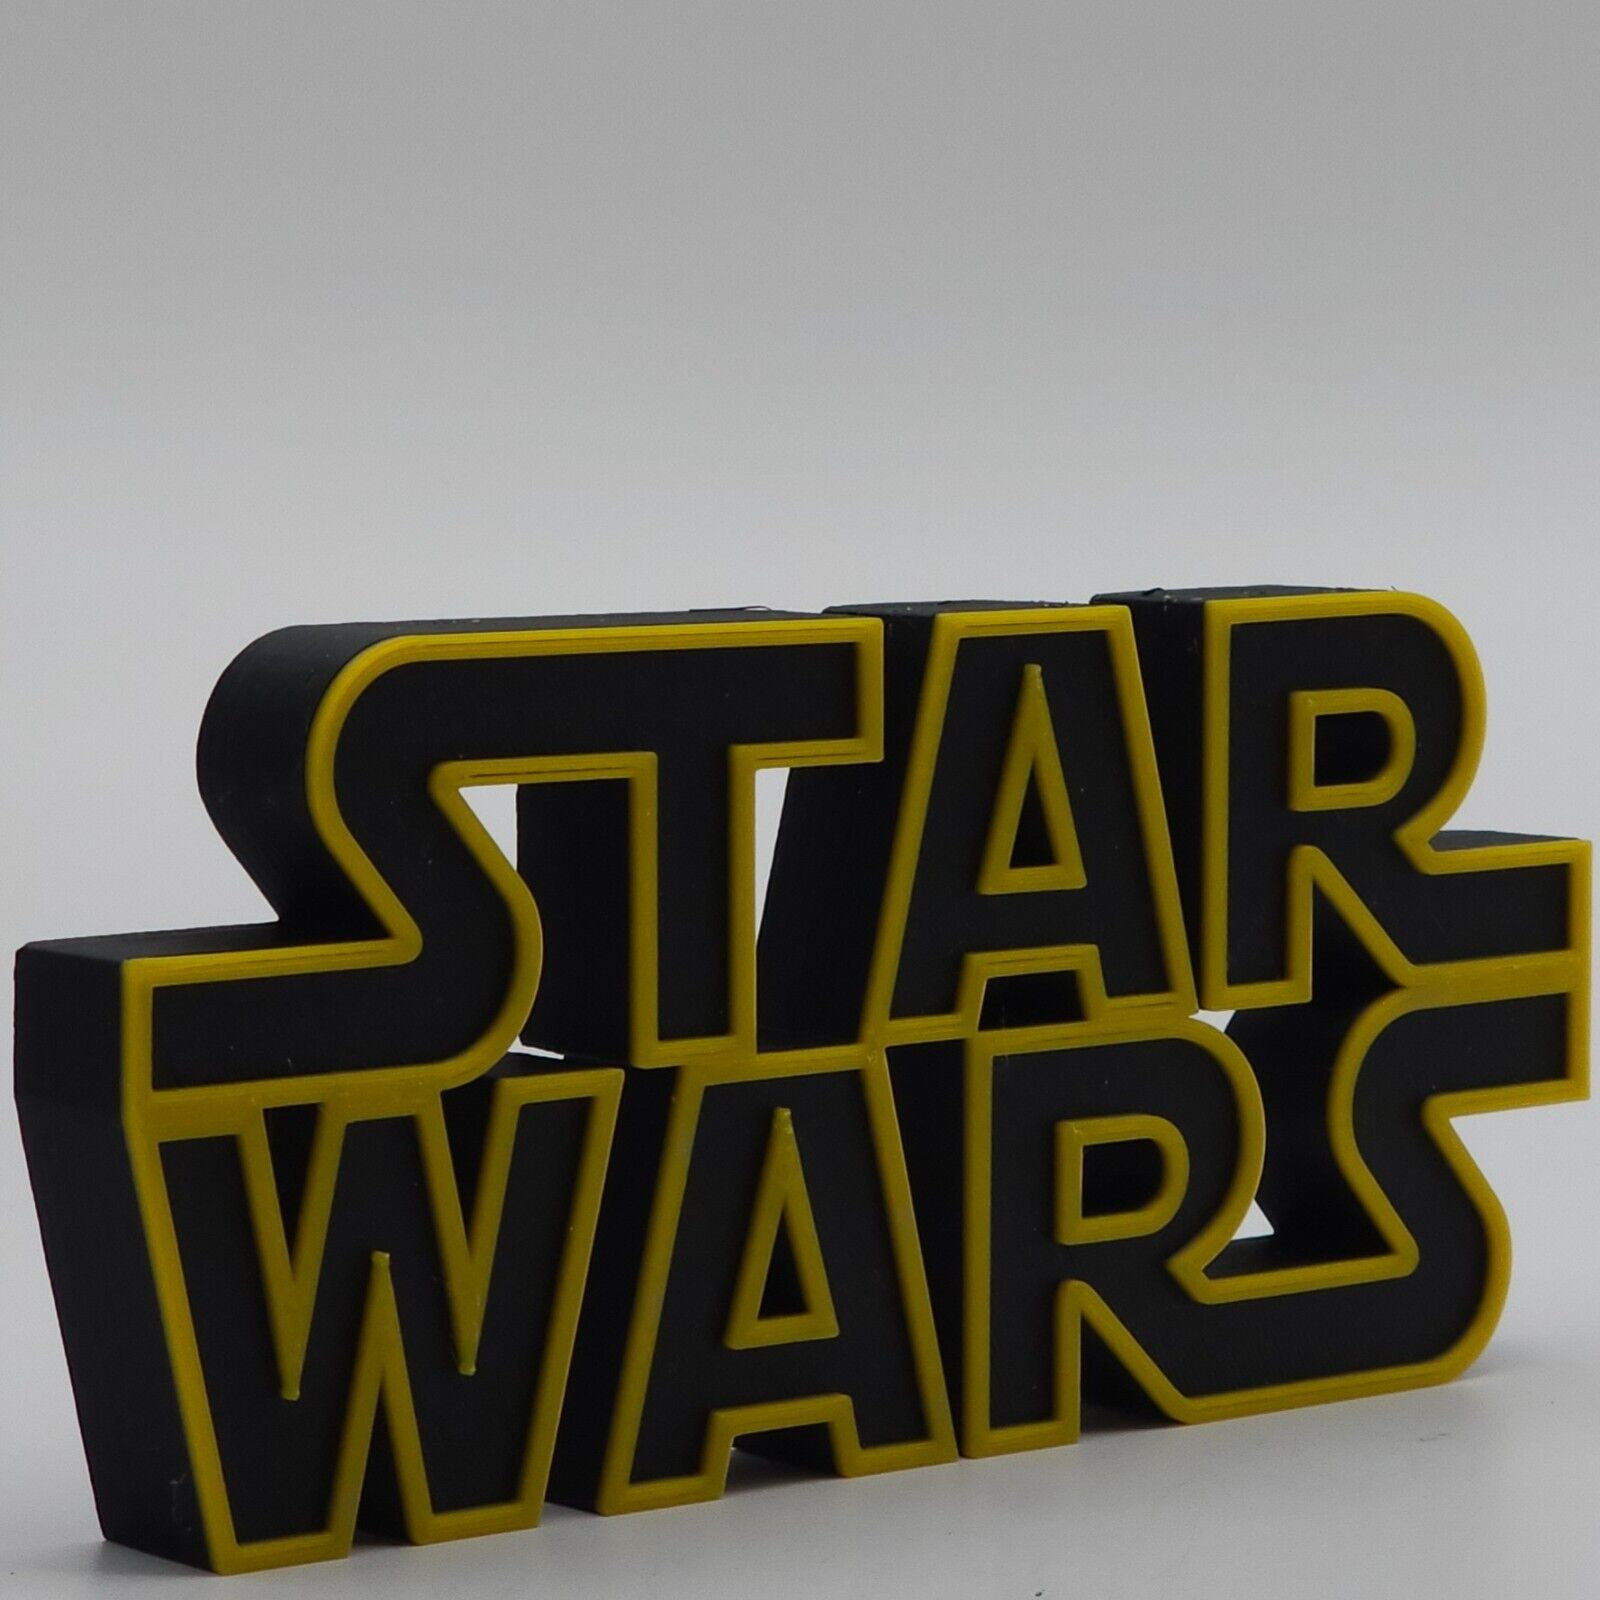 3D Printed Star Wars Logo - Freestanding Collector's Display Sign, Home Decor